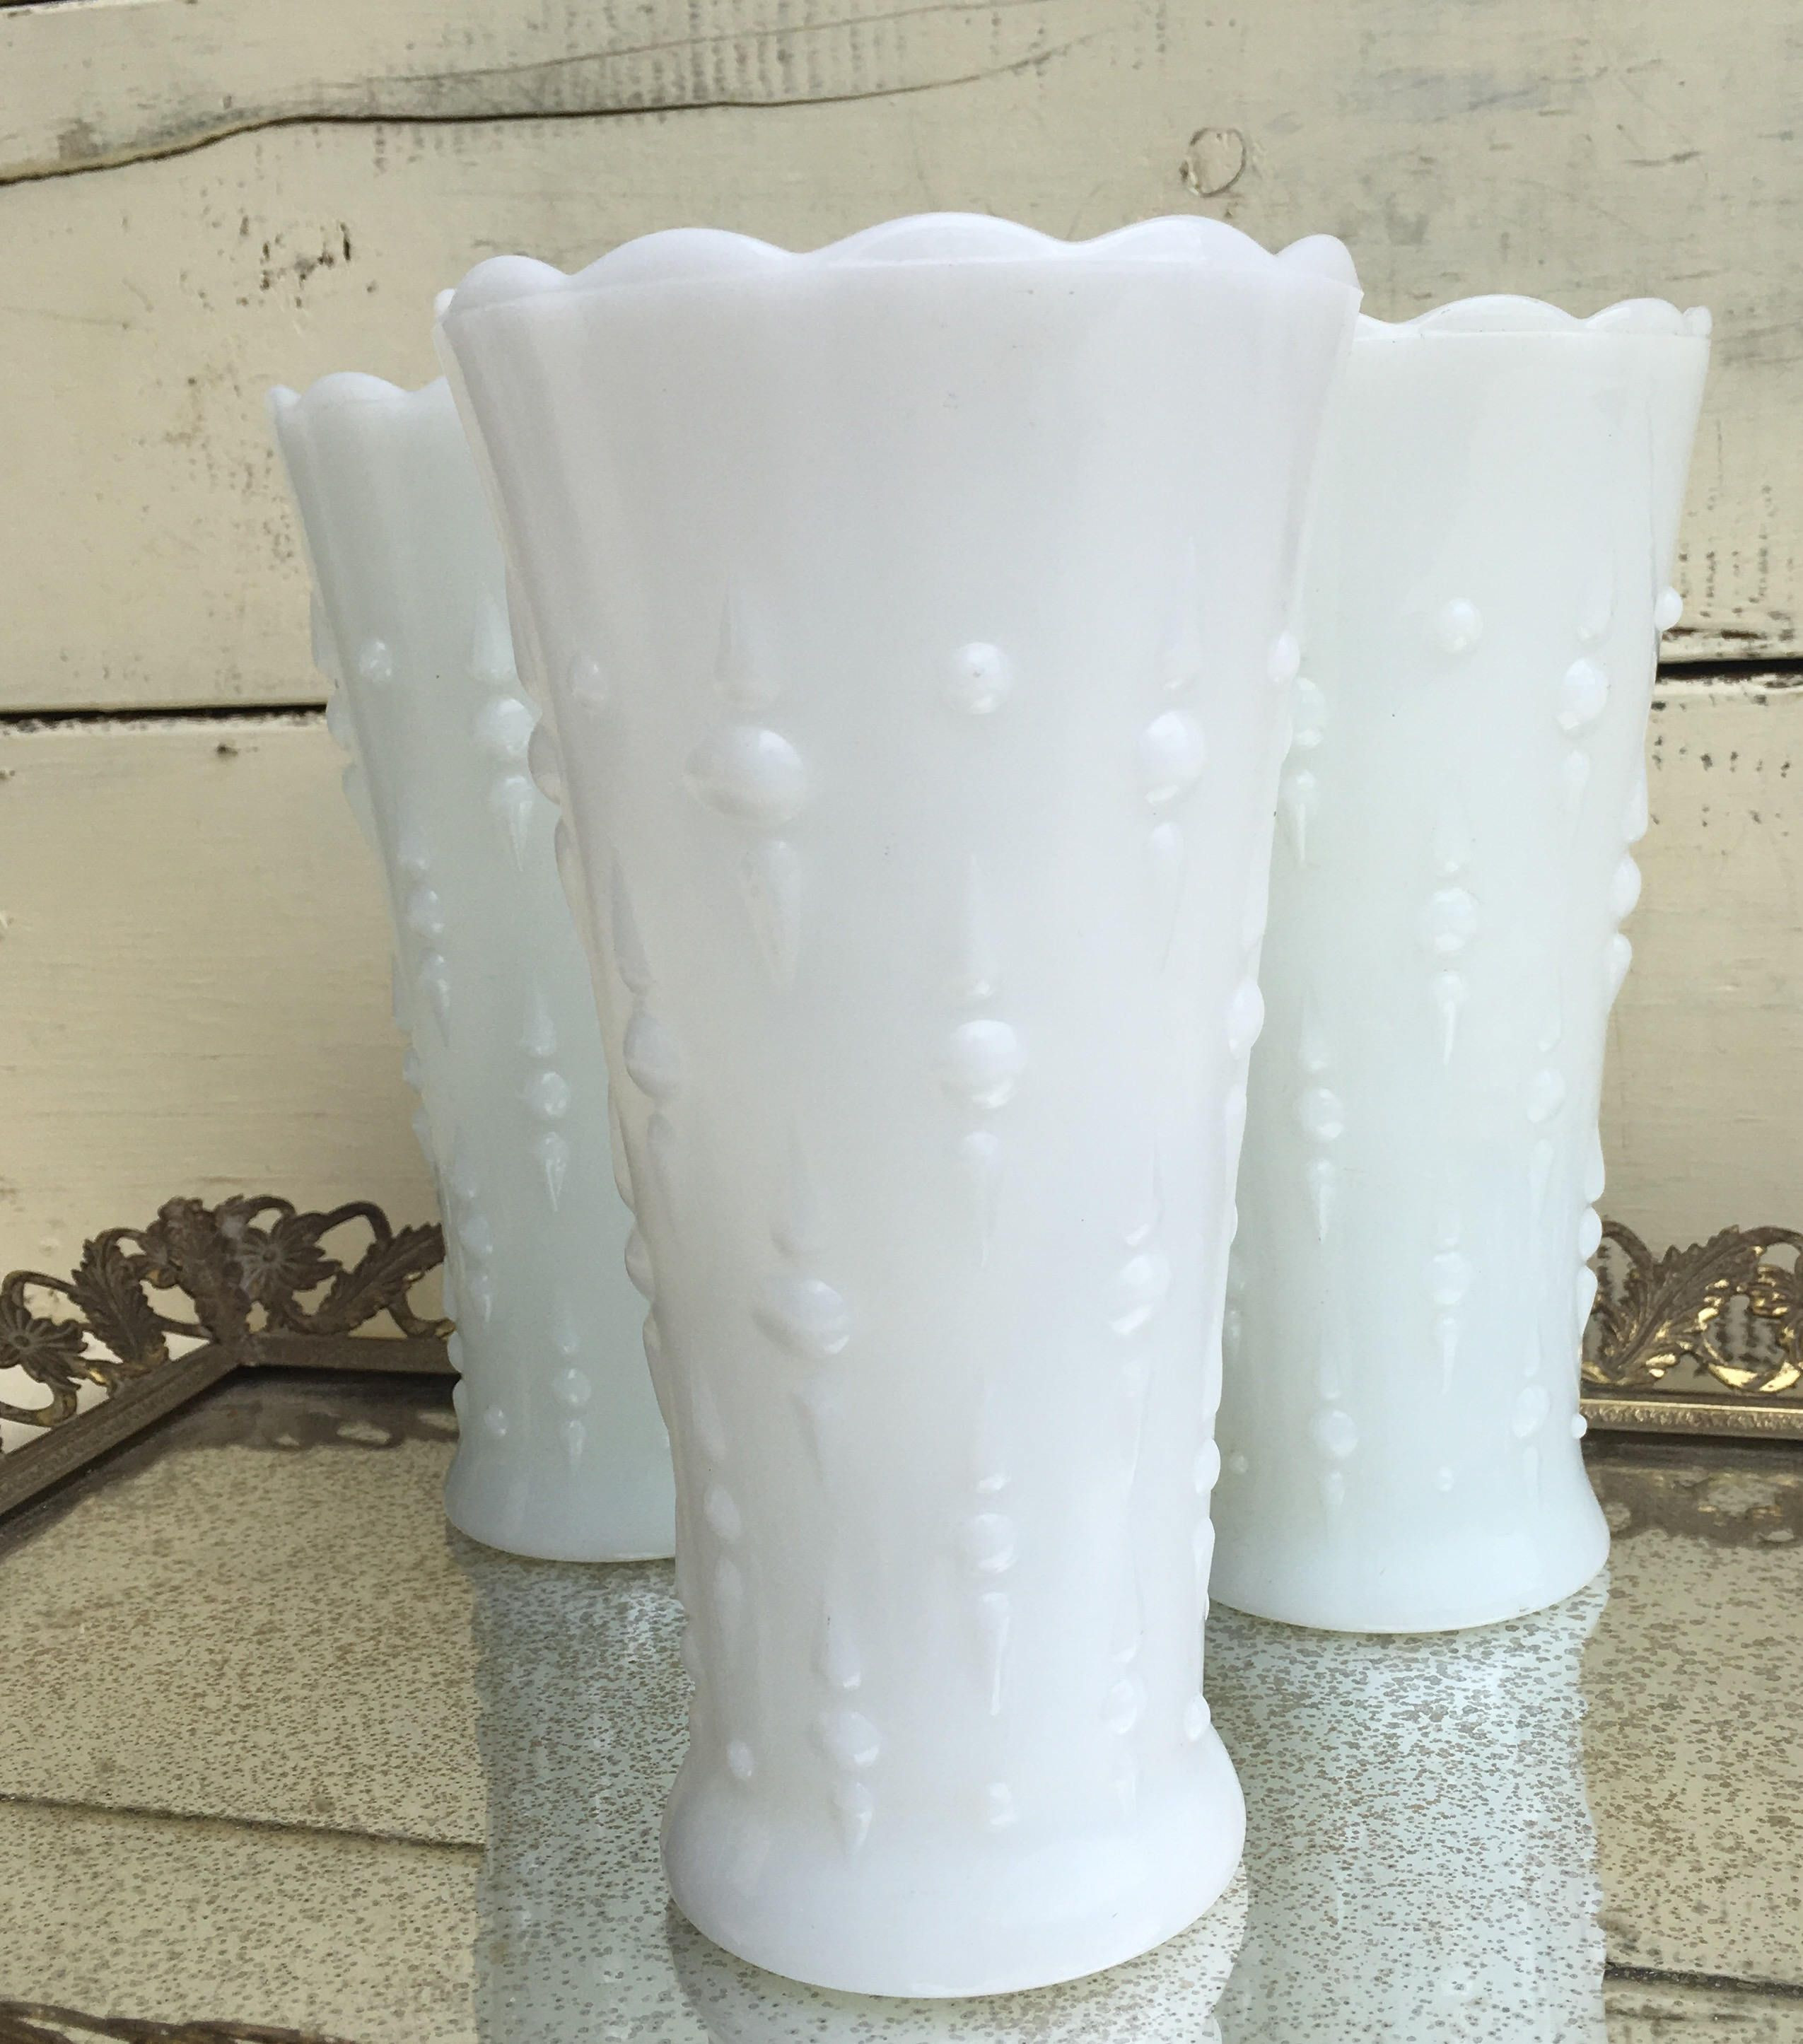 18 Recommended Anchor Hocking Glass Vases 2022 free download anchor hocking glass vases of vintage milk glass vase set dots and arrows design milk glass 3 regarding vintage milk glass vase set dots and arrows design milk glass 3 milk